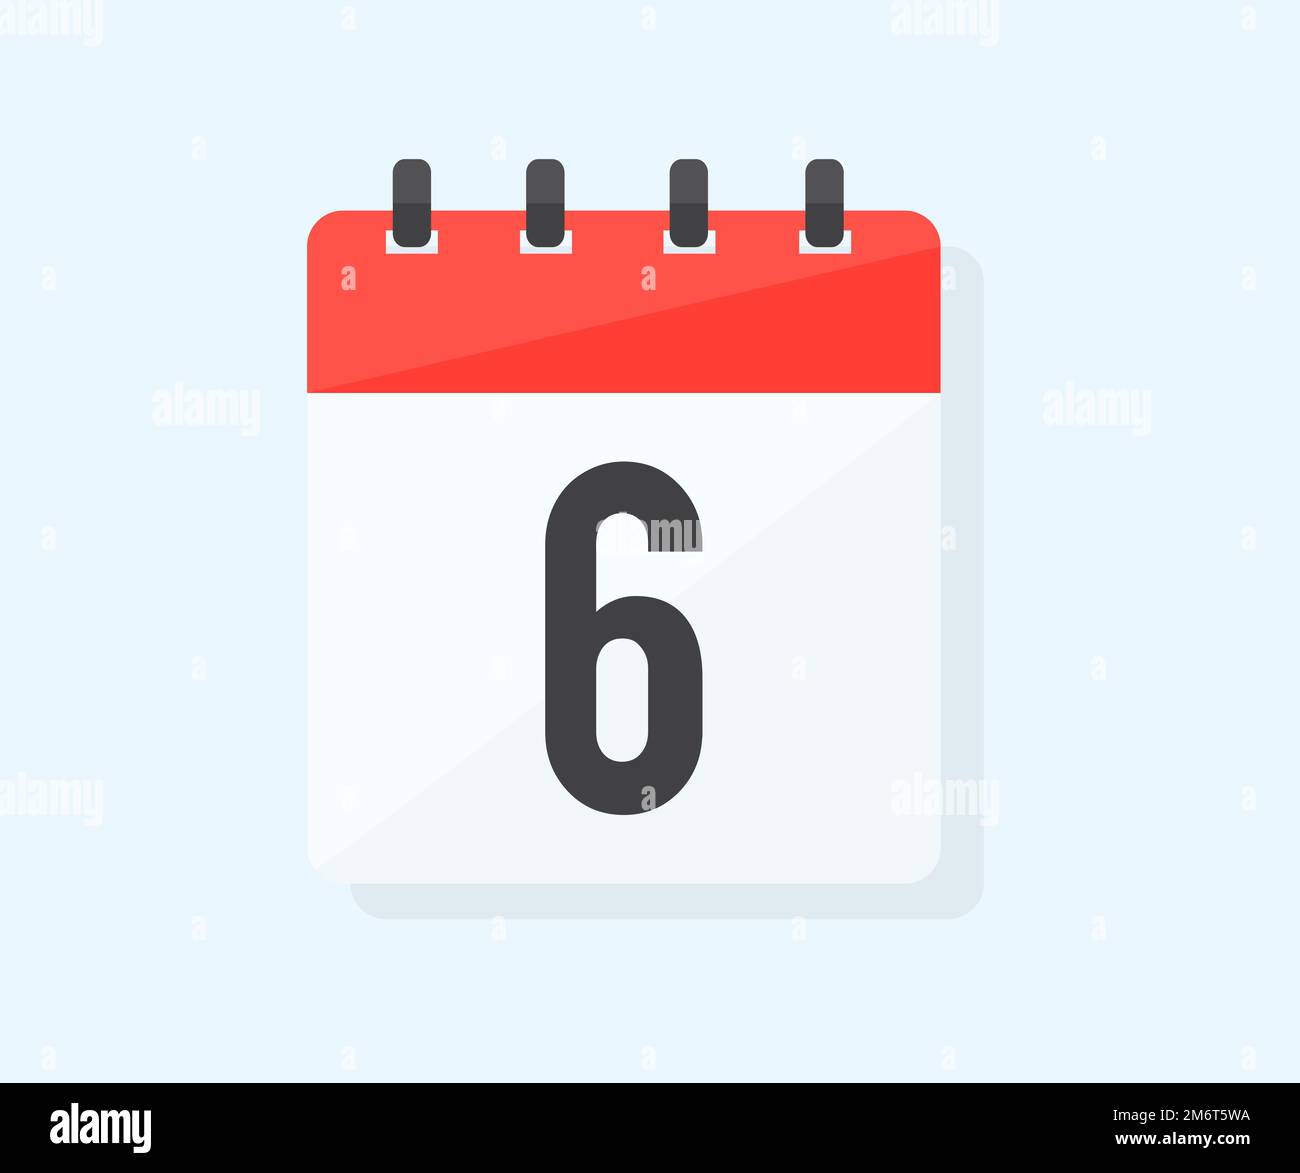 The the sixth day of the month with date 6 logo design. Calendar icon flat day 6. Reminder symbol. Event schedule date. Schedule planning. Stock Vector